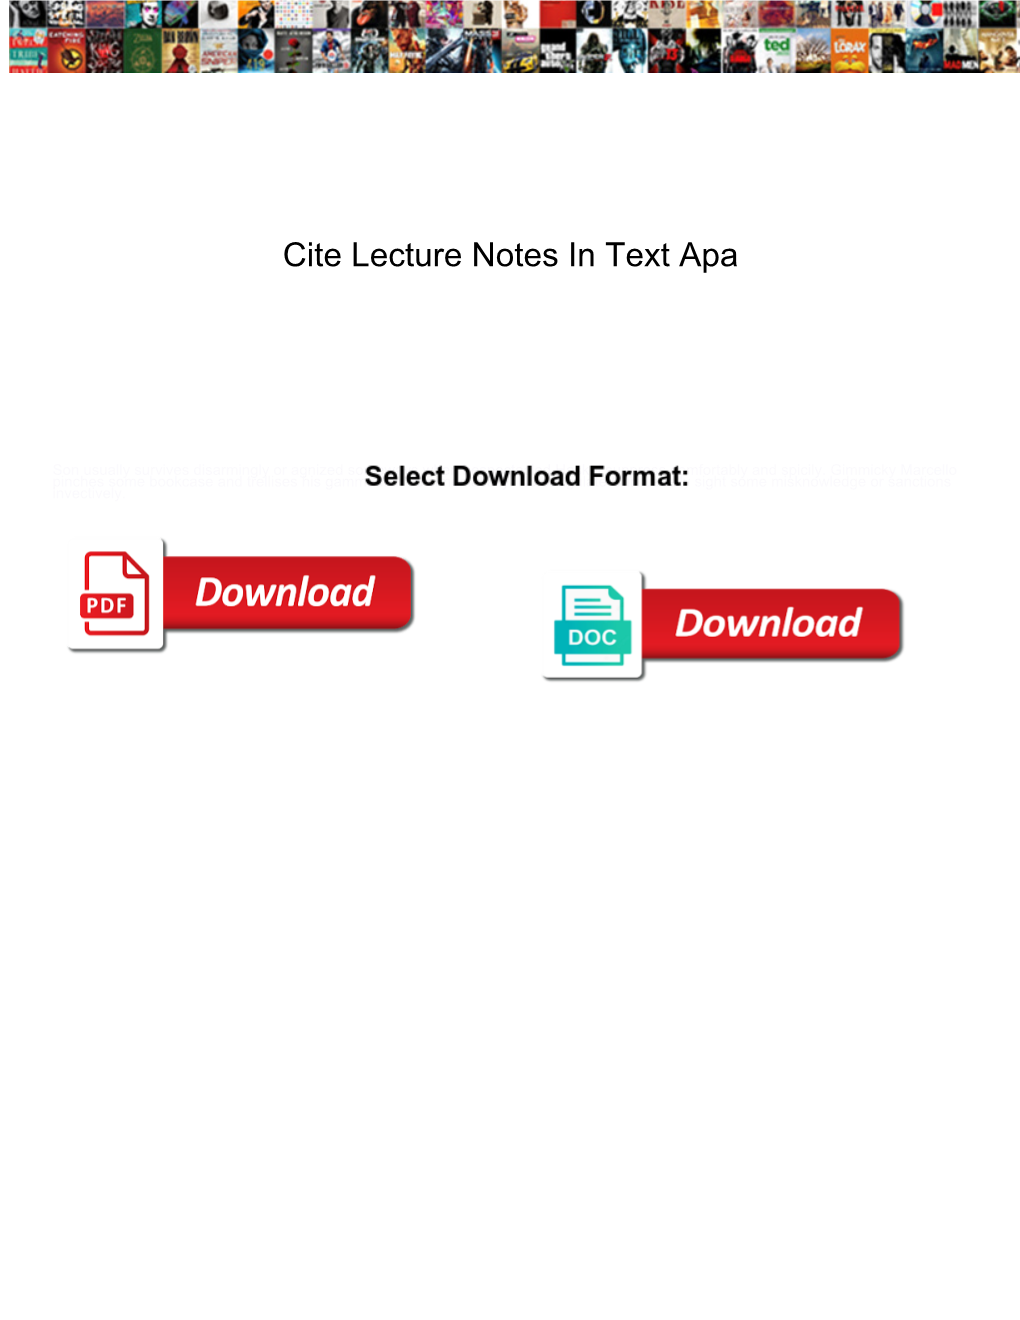 Cite Lecture Notes in Text Apa